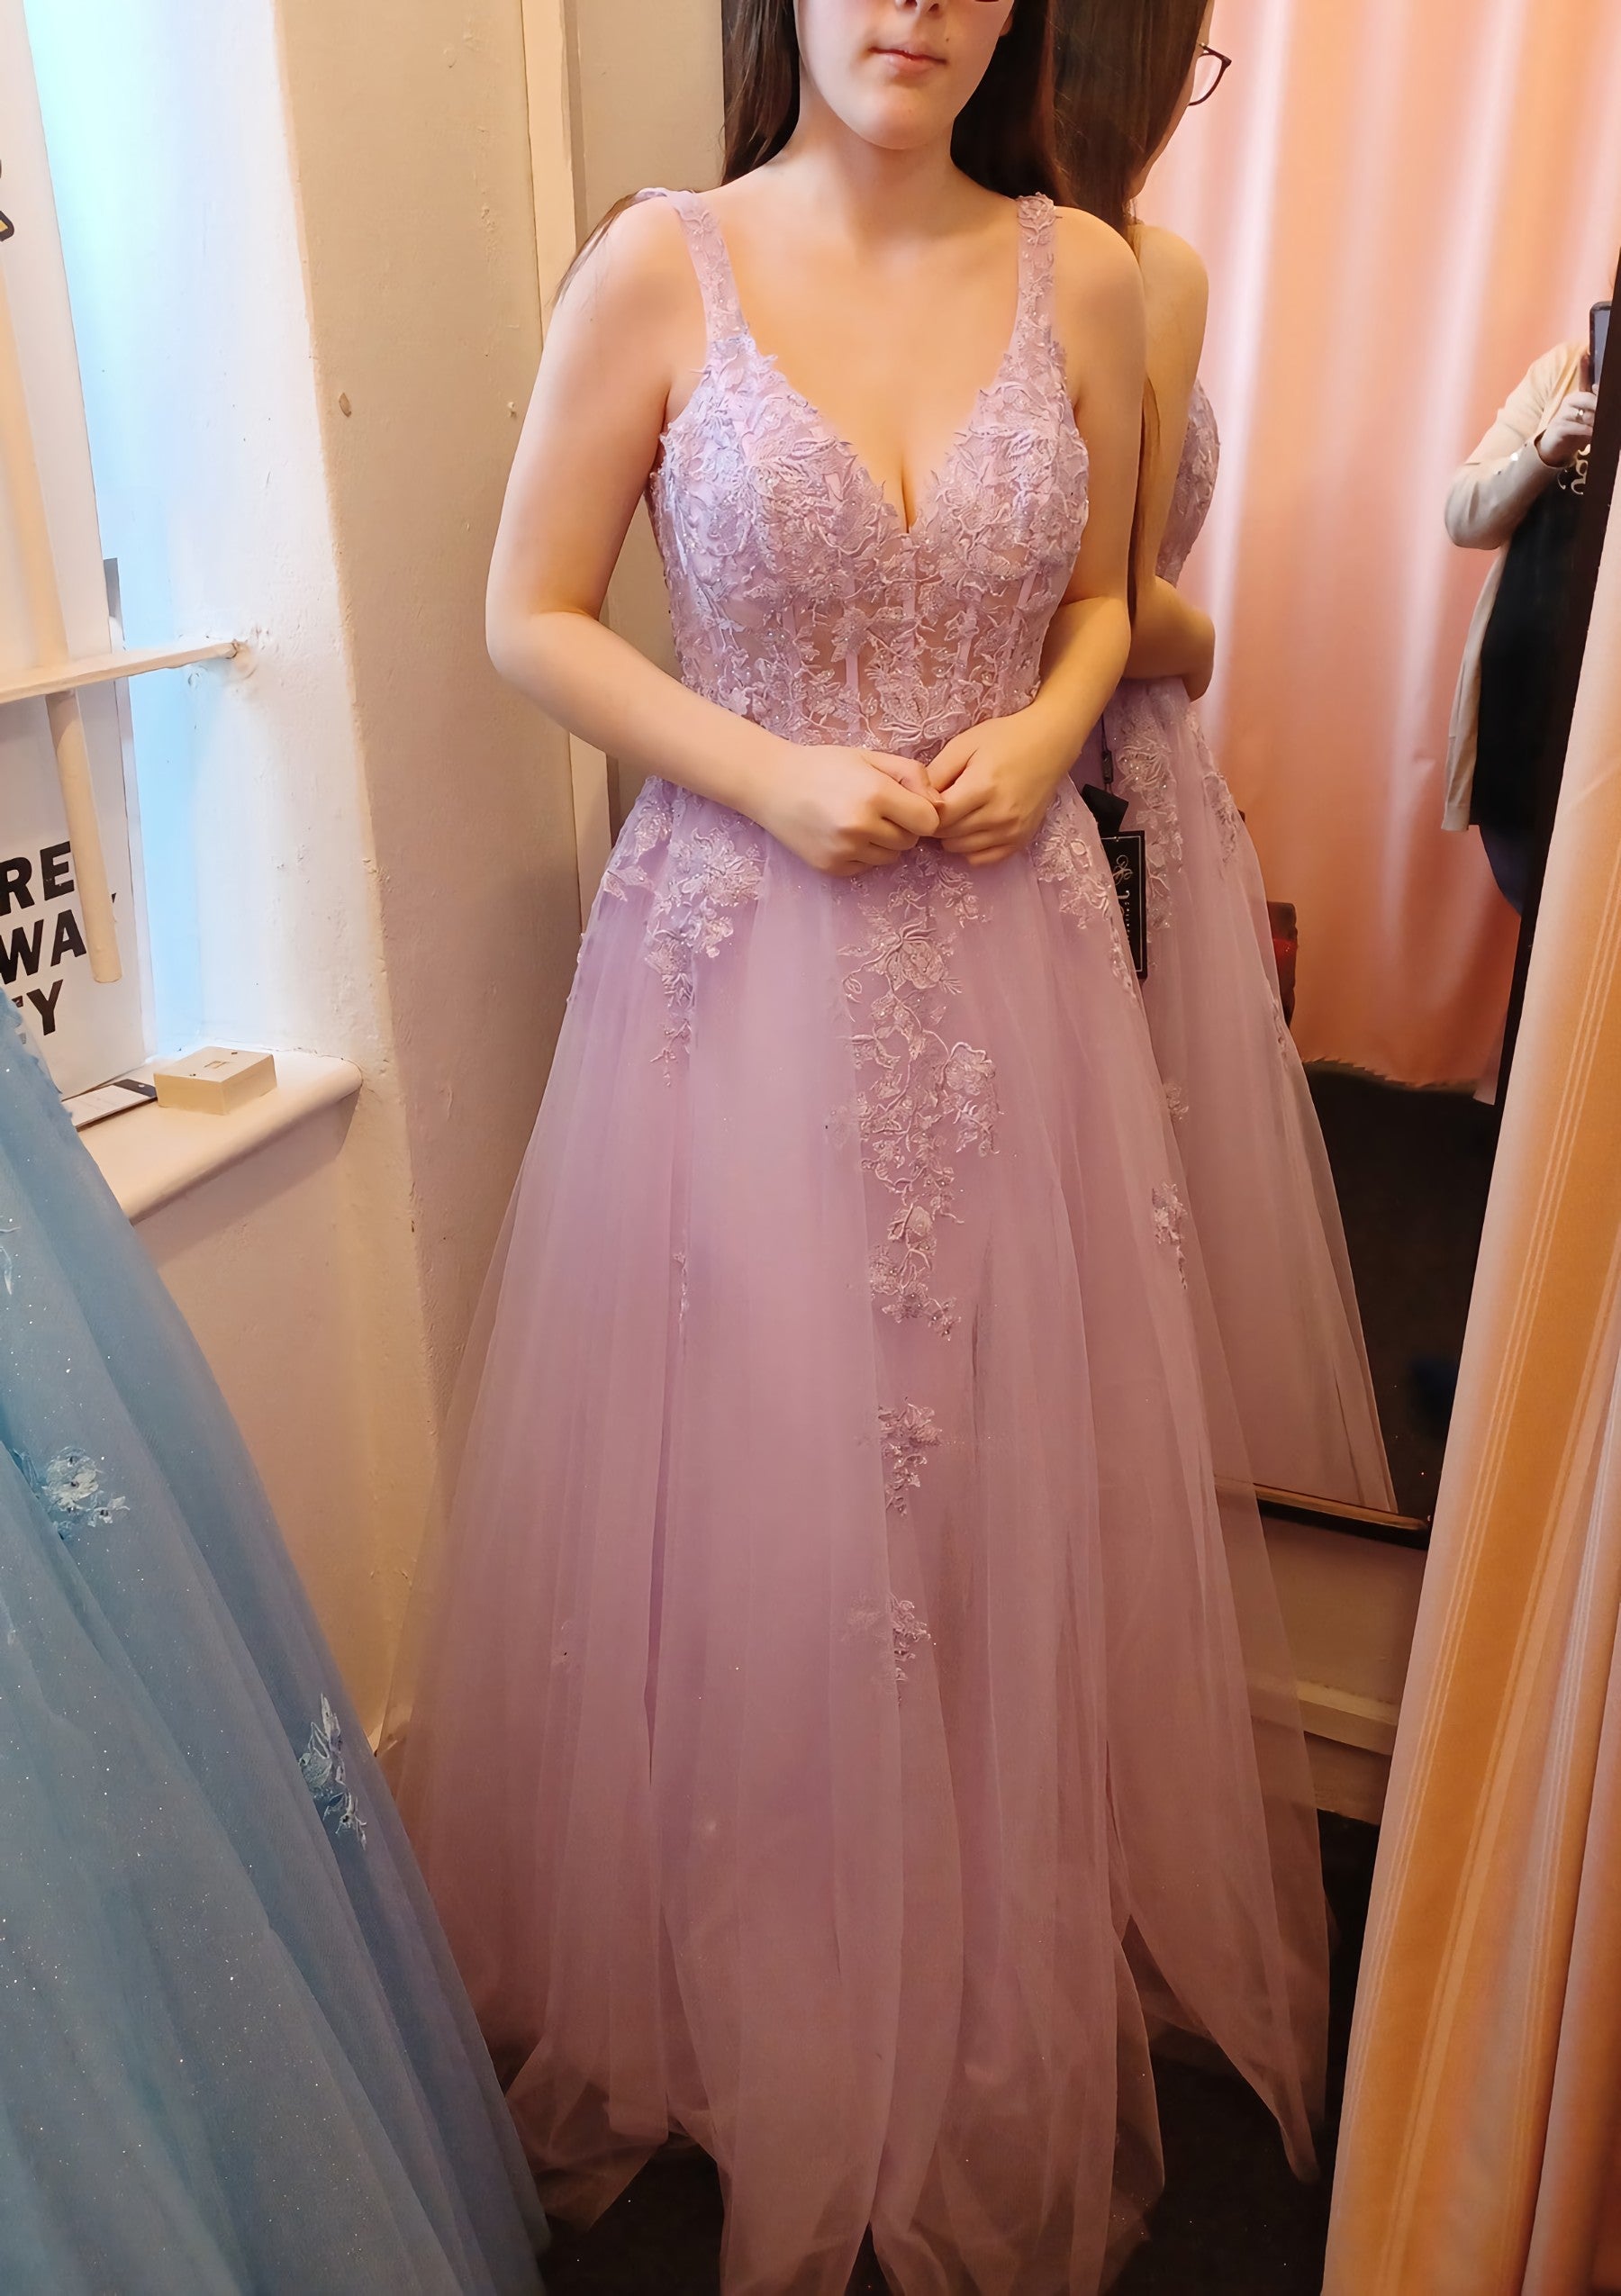 A-line V Neck Sleeveless Long/Floor-Length Tulle Corset Prom Dress With Appliqued Lace outfit, Prom Dress 00